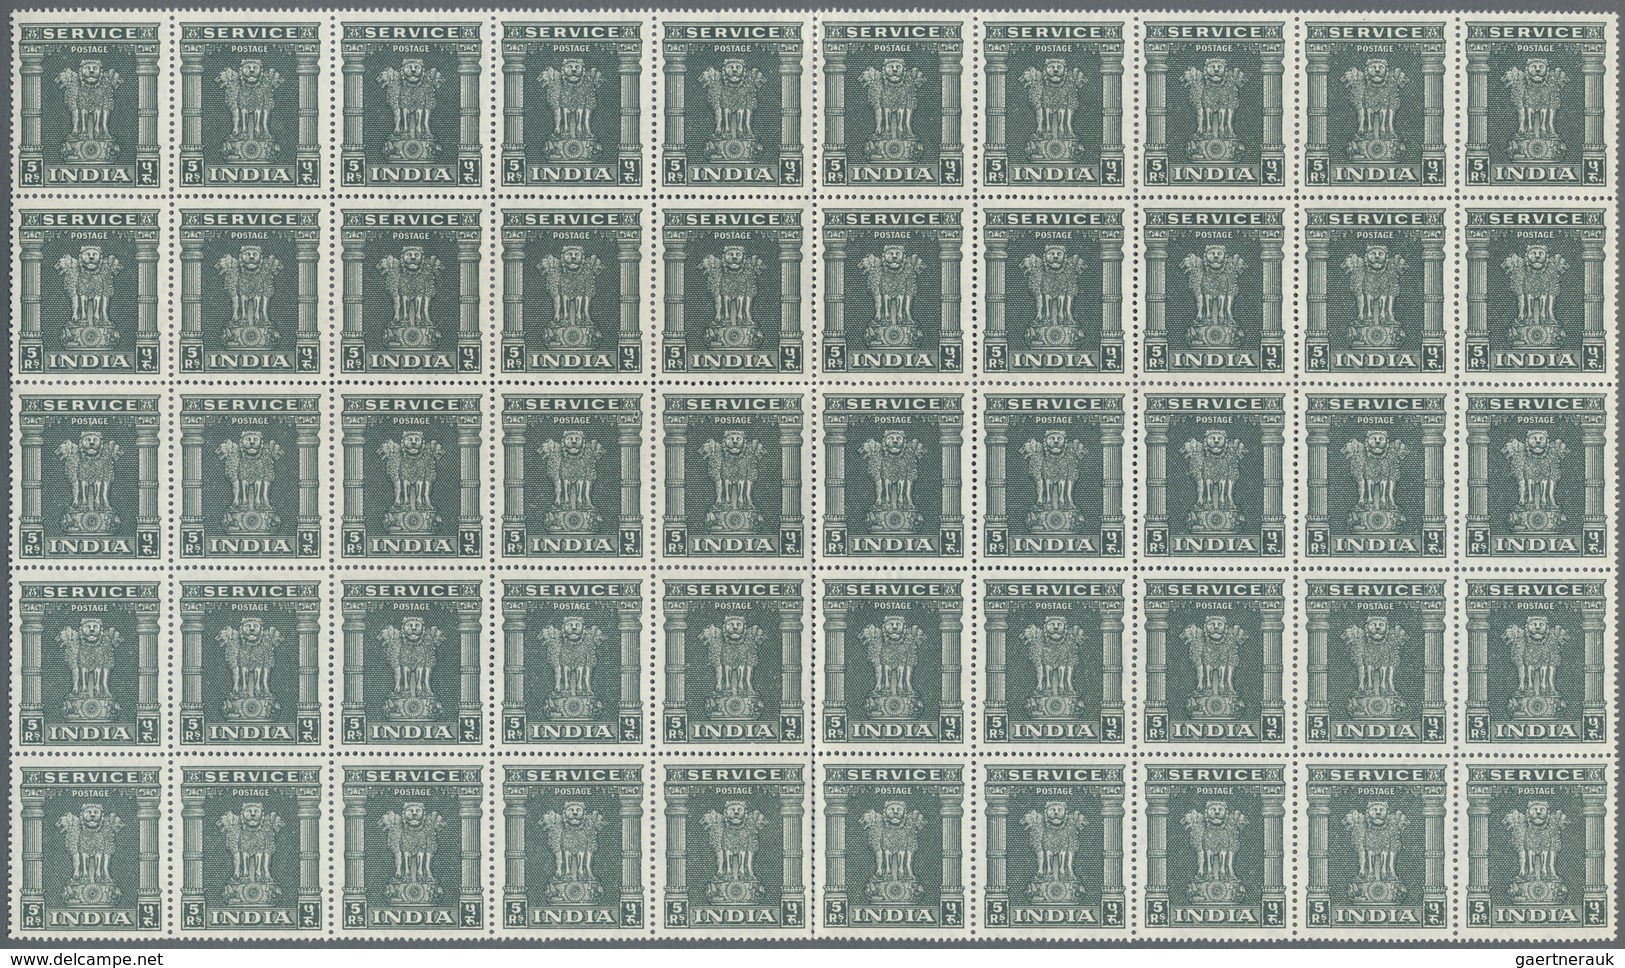 ** Indien - Dienstmarken: 1950, 2, 5 and 10 Rupies, sheetparts with totally 200 of each value, mnh, CV